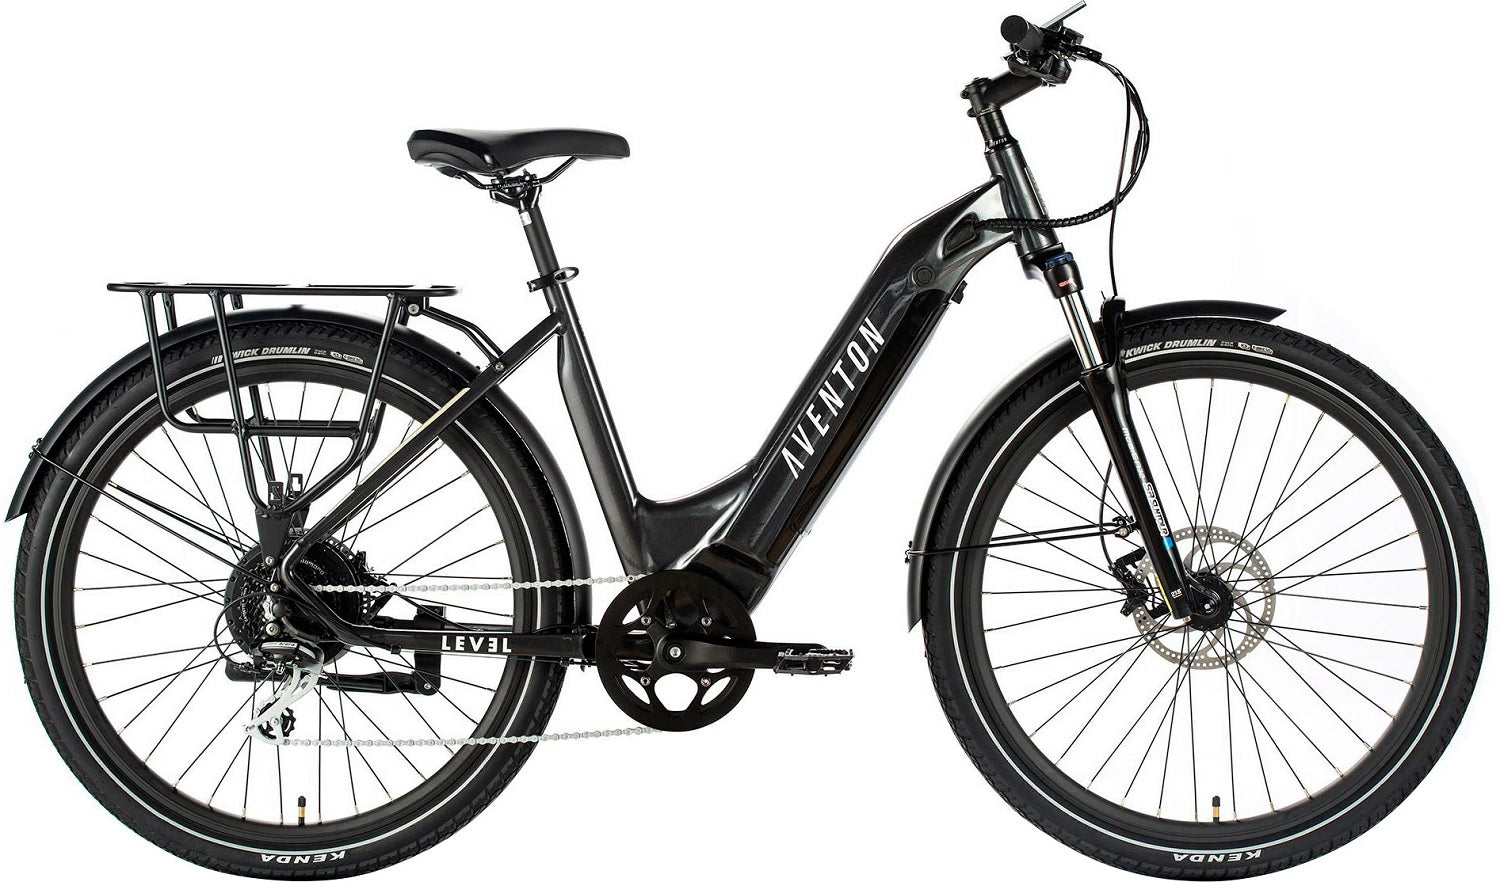 Aventon Level Commuter Step-Through Ebike with 40-mile Range - S/M - Earth Grey (Certified Refurbished)